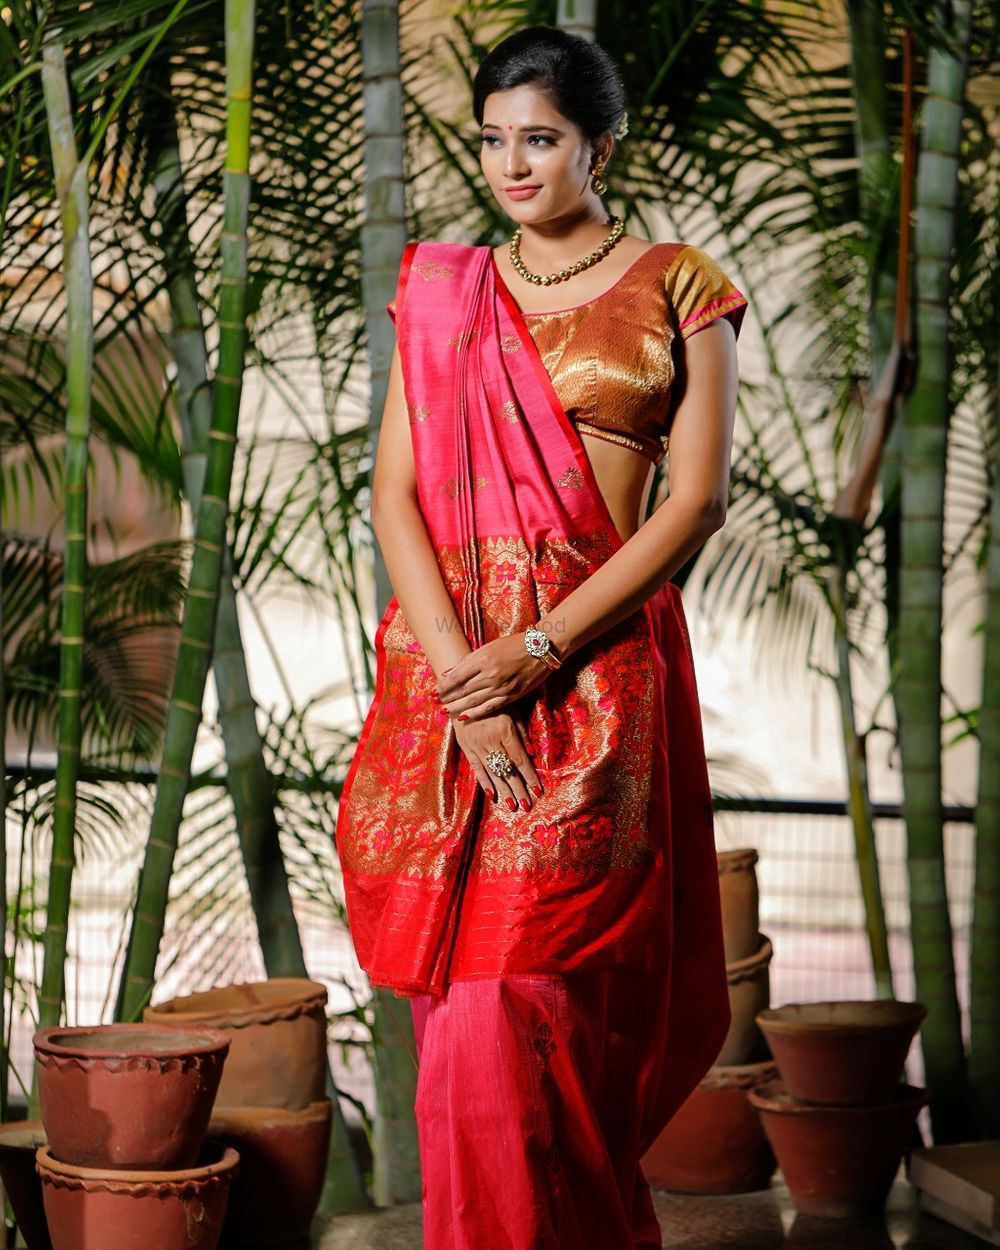 Photo From Tussar Silk - By Silk Kothi